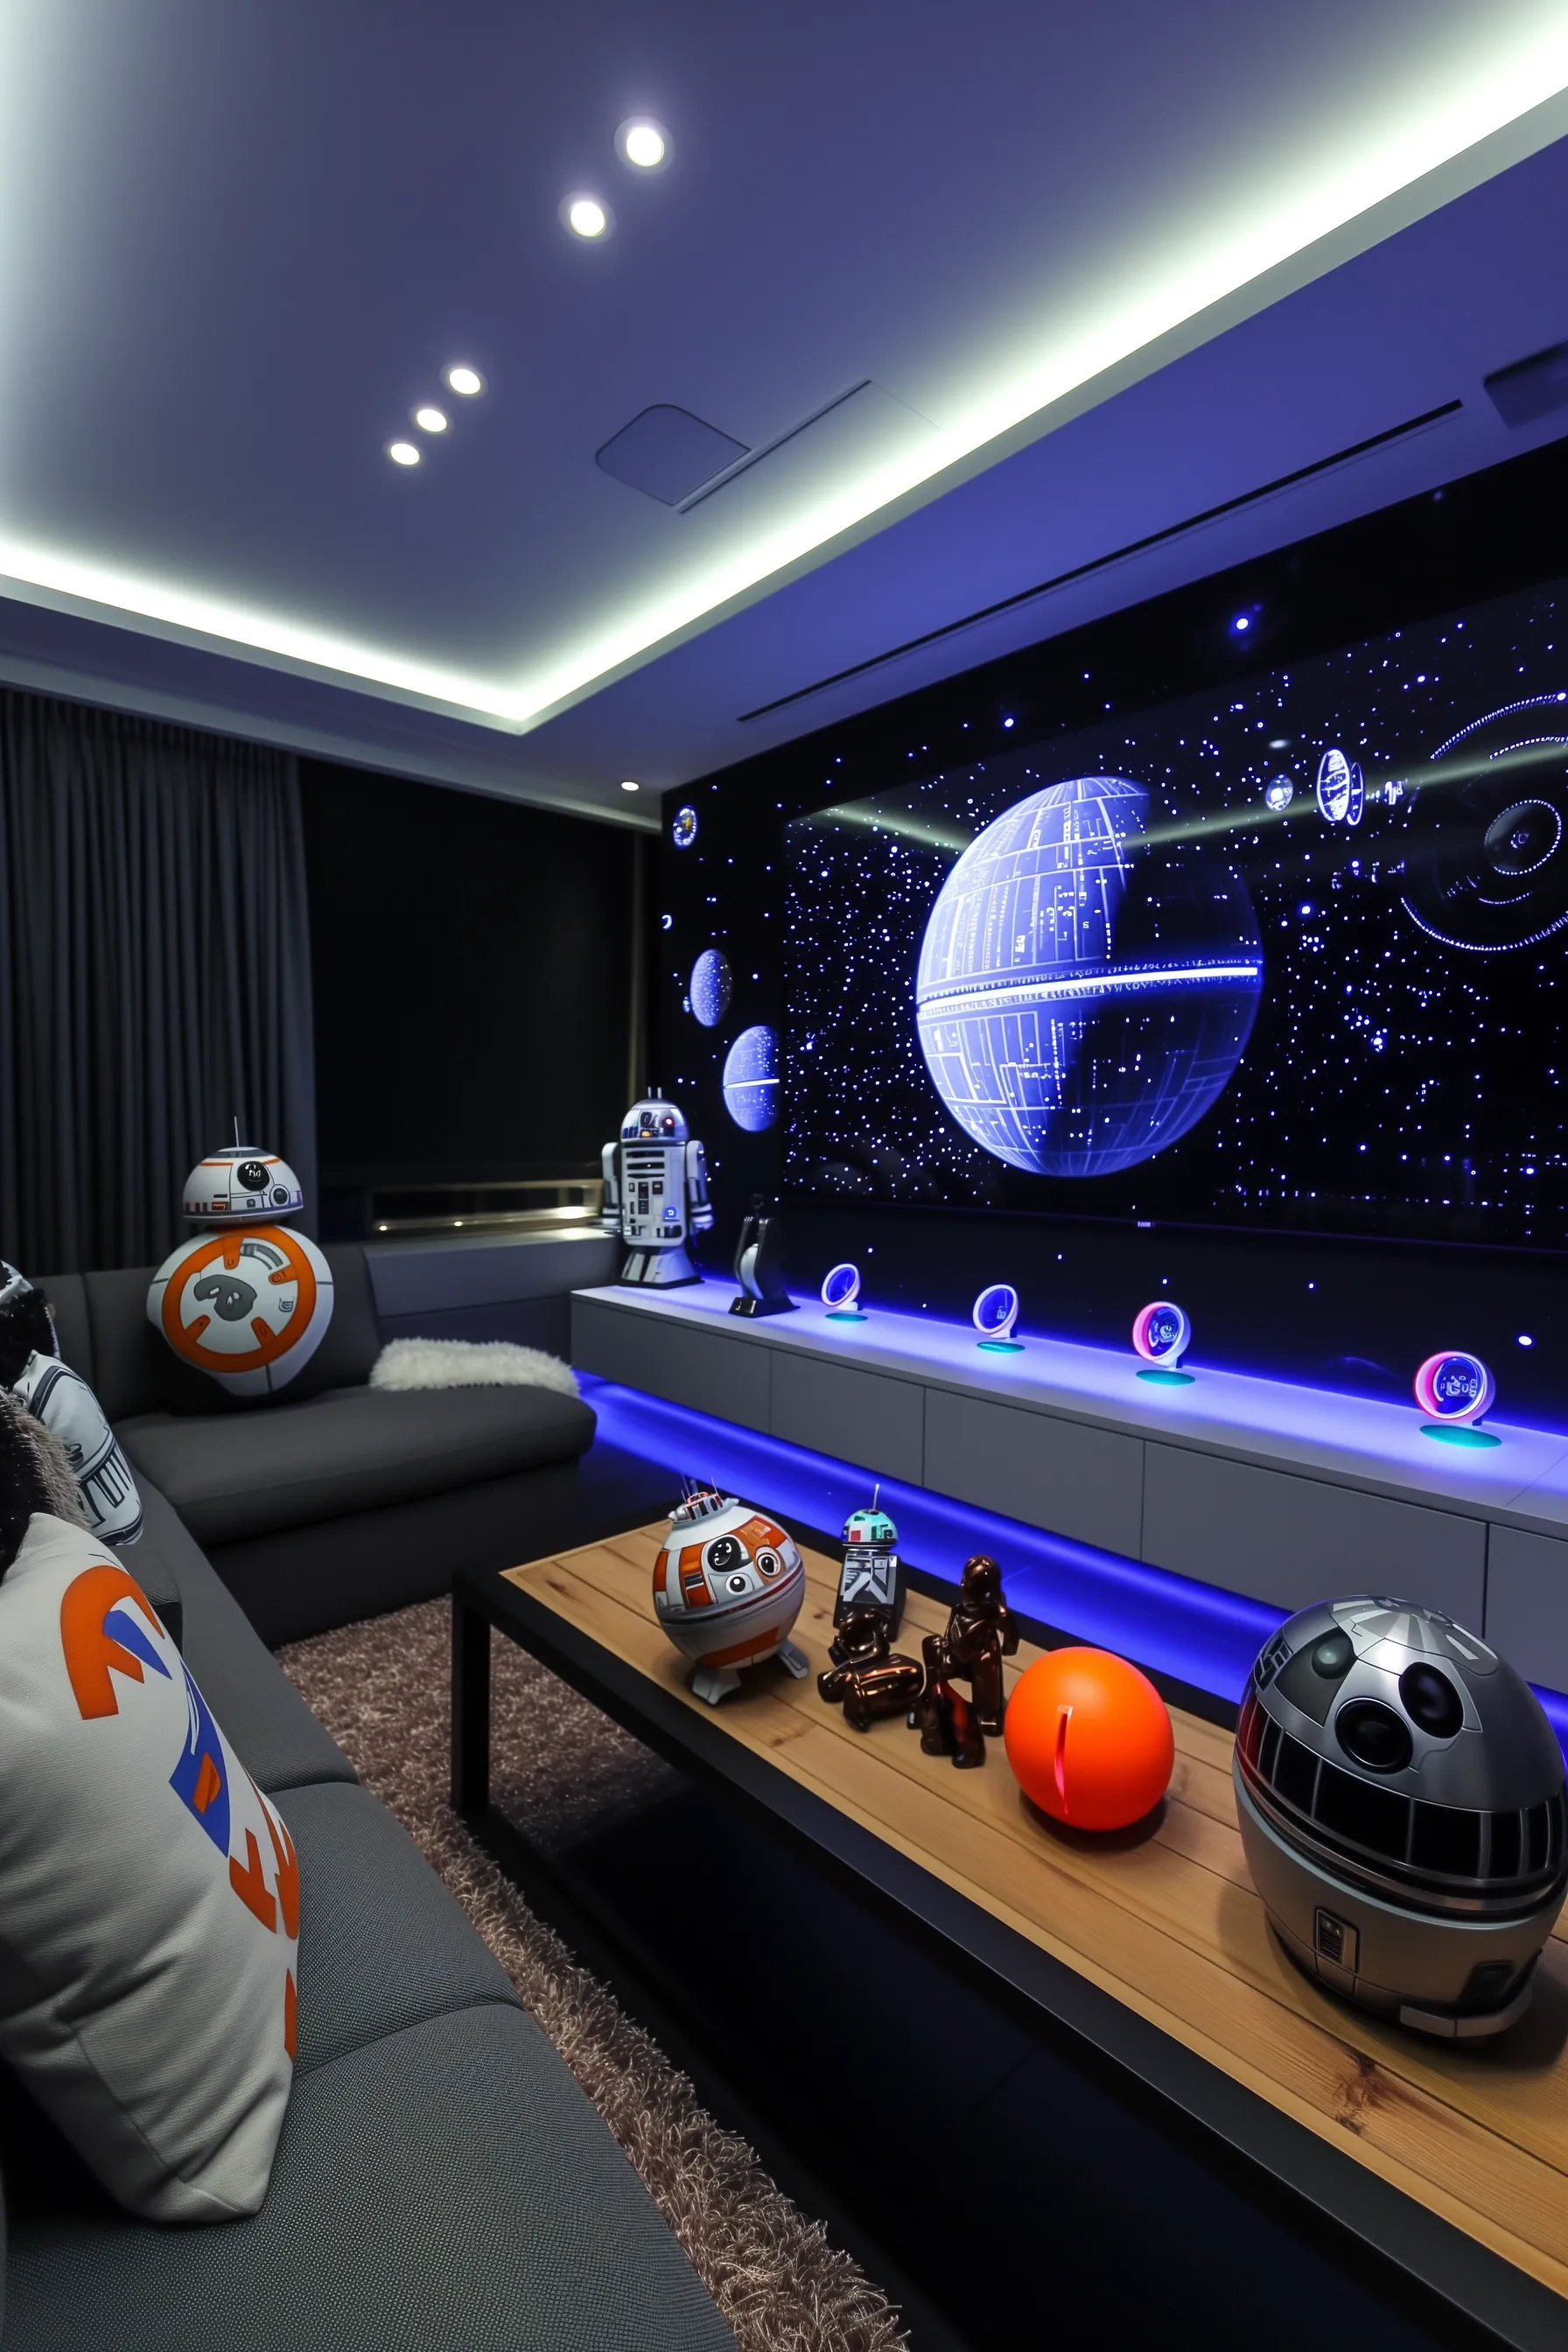 A game room with starwars merch and a grey couch